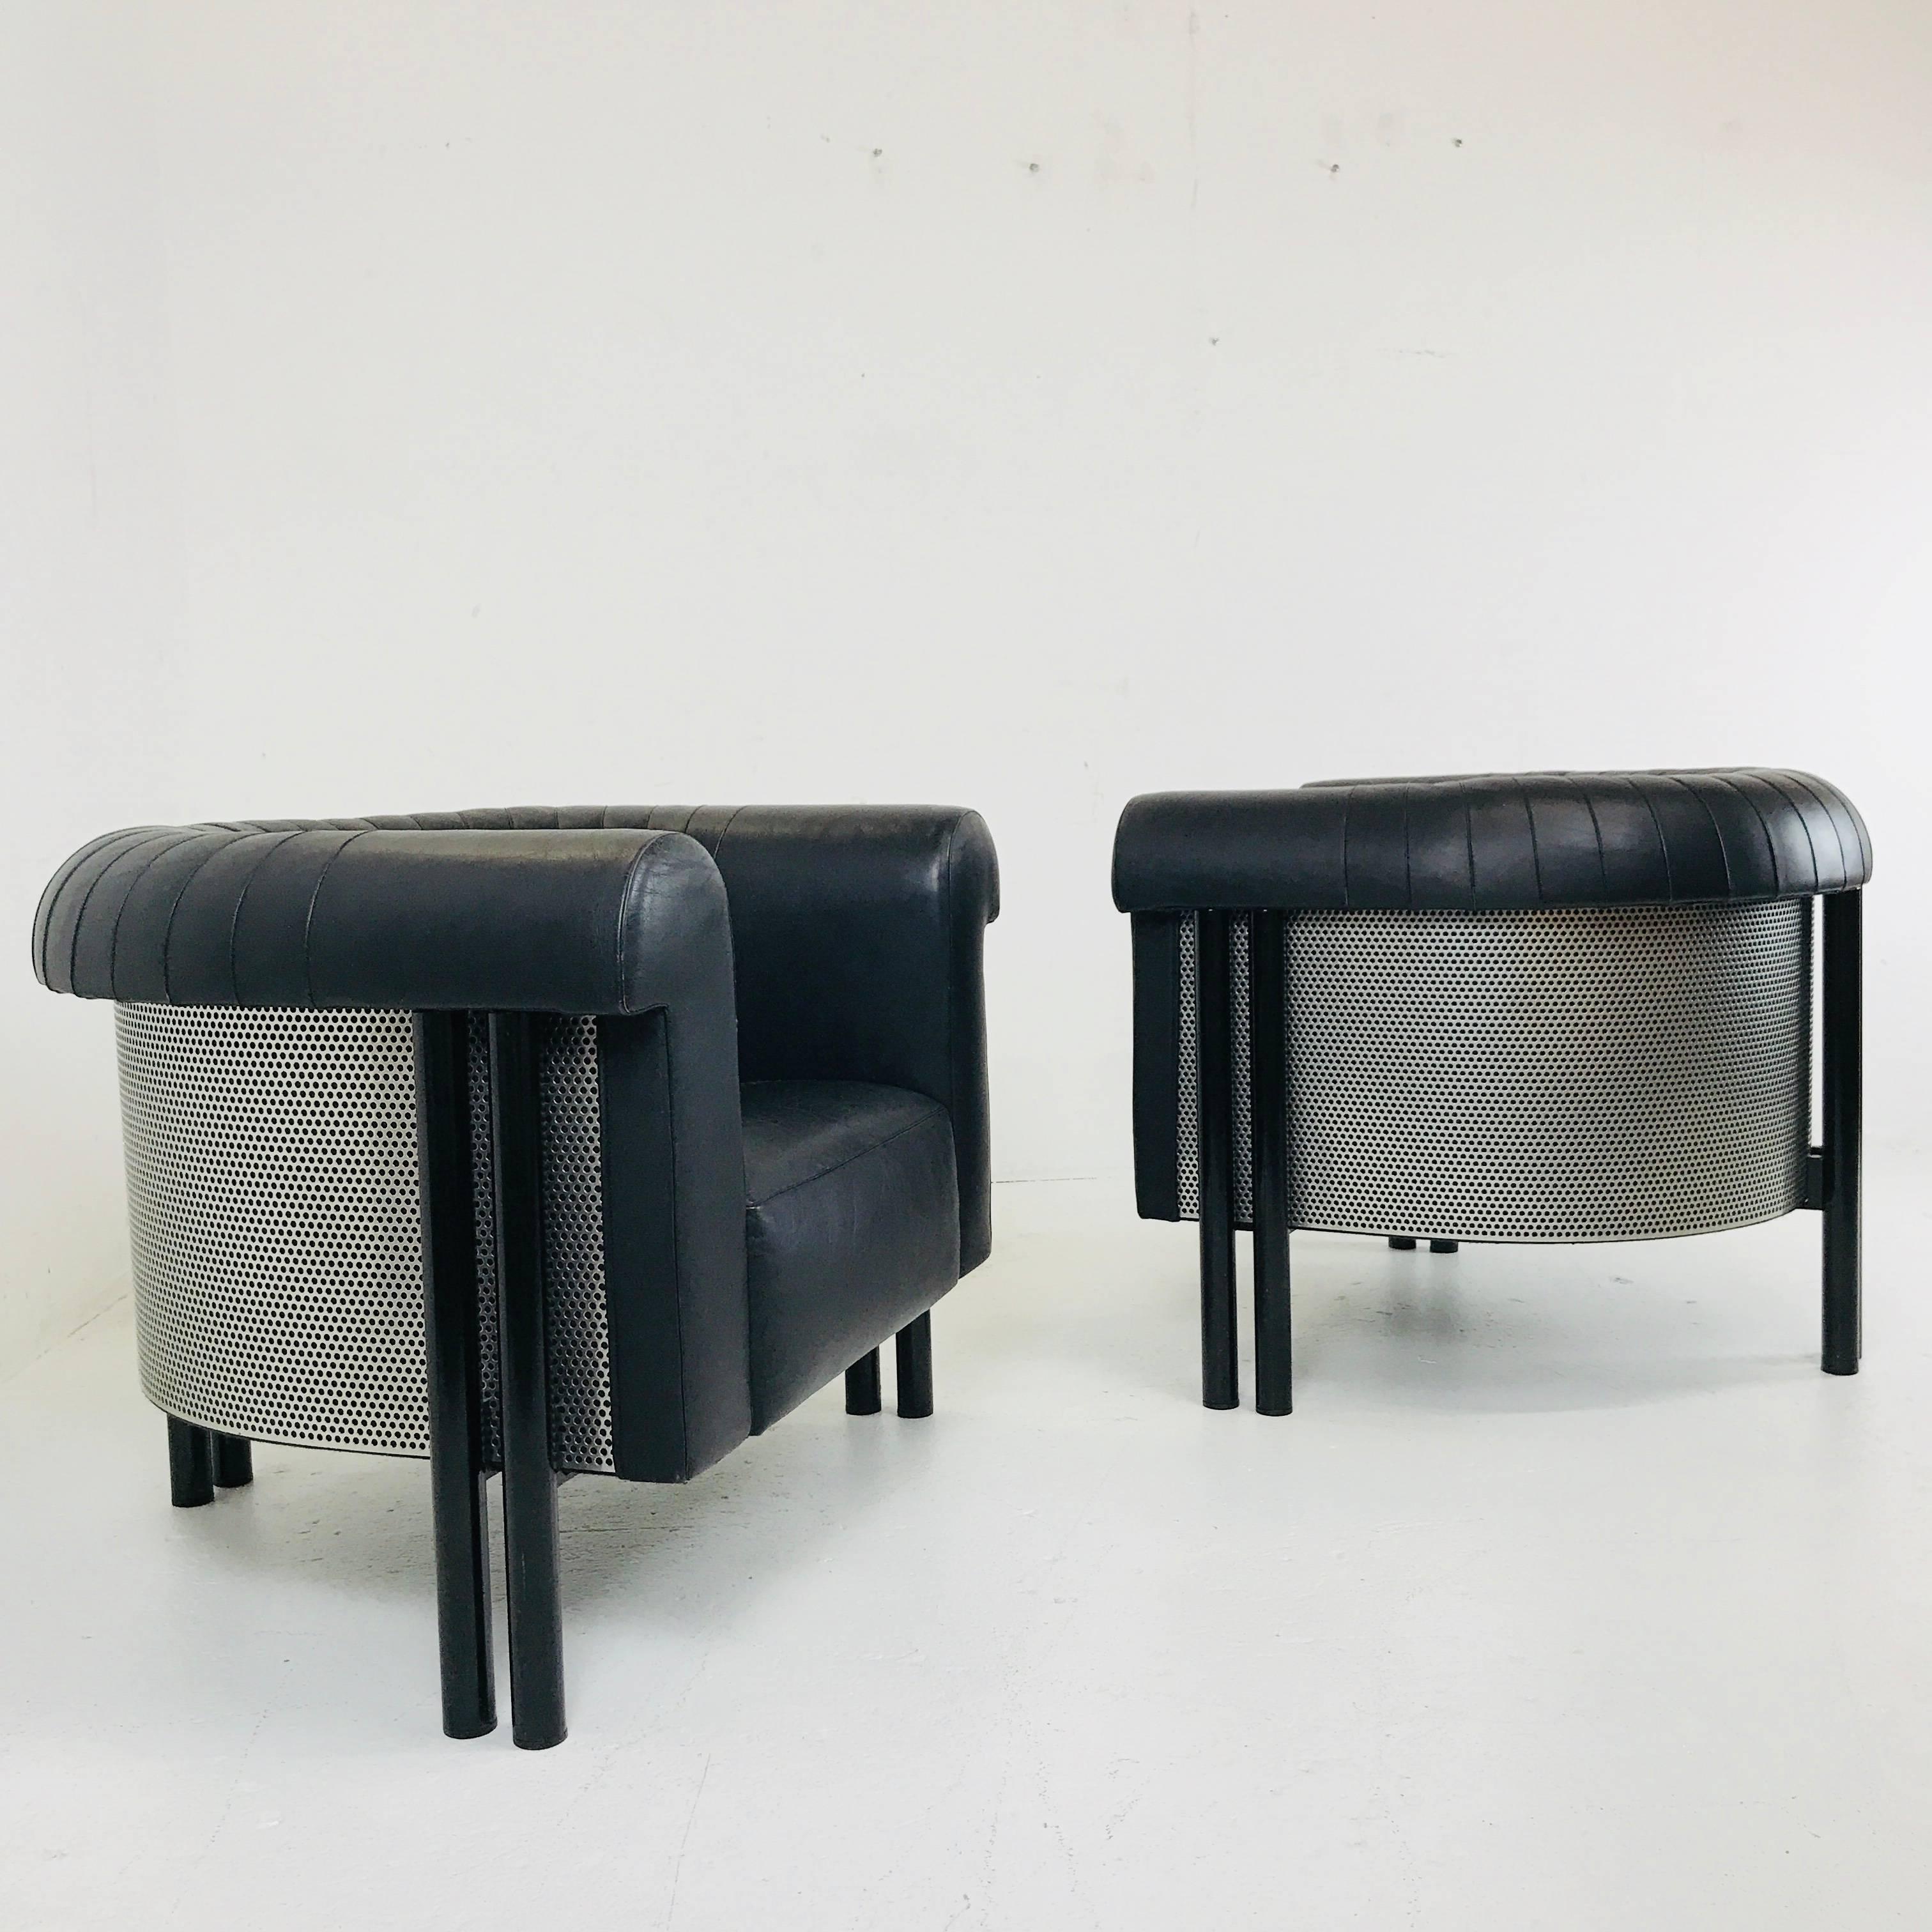 Pair of black leather lounge armchairs by DeSede with perforated metal exterior. Chairs are in good vintage condition with wear from use and age.

Dimensions: 35.5